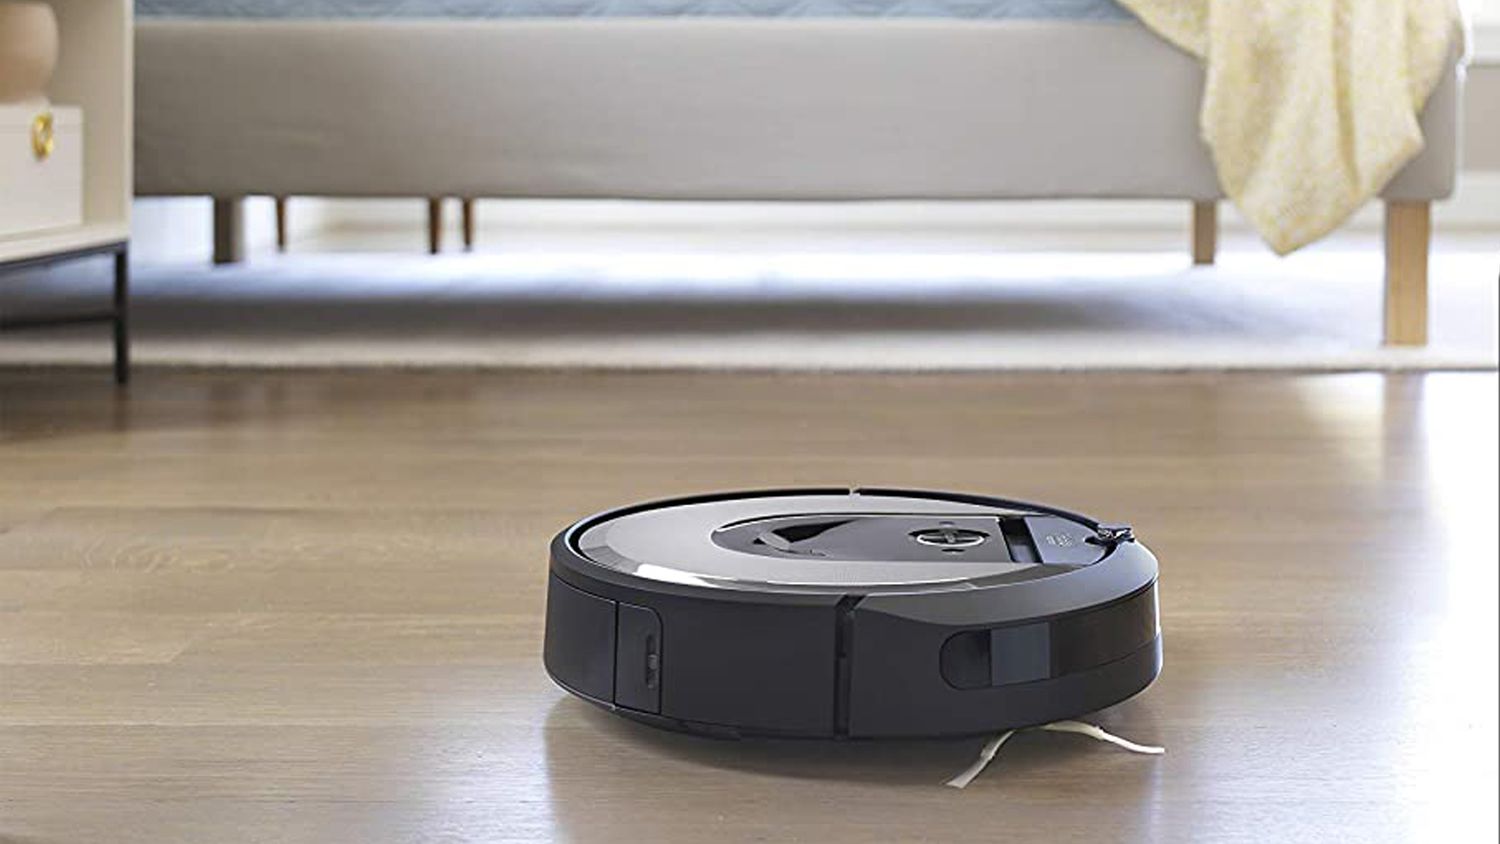 Best Robot Vacuums For Hardwood Floors, The Best Vacuum For Hardwood Floors And Pet Hair